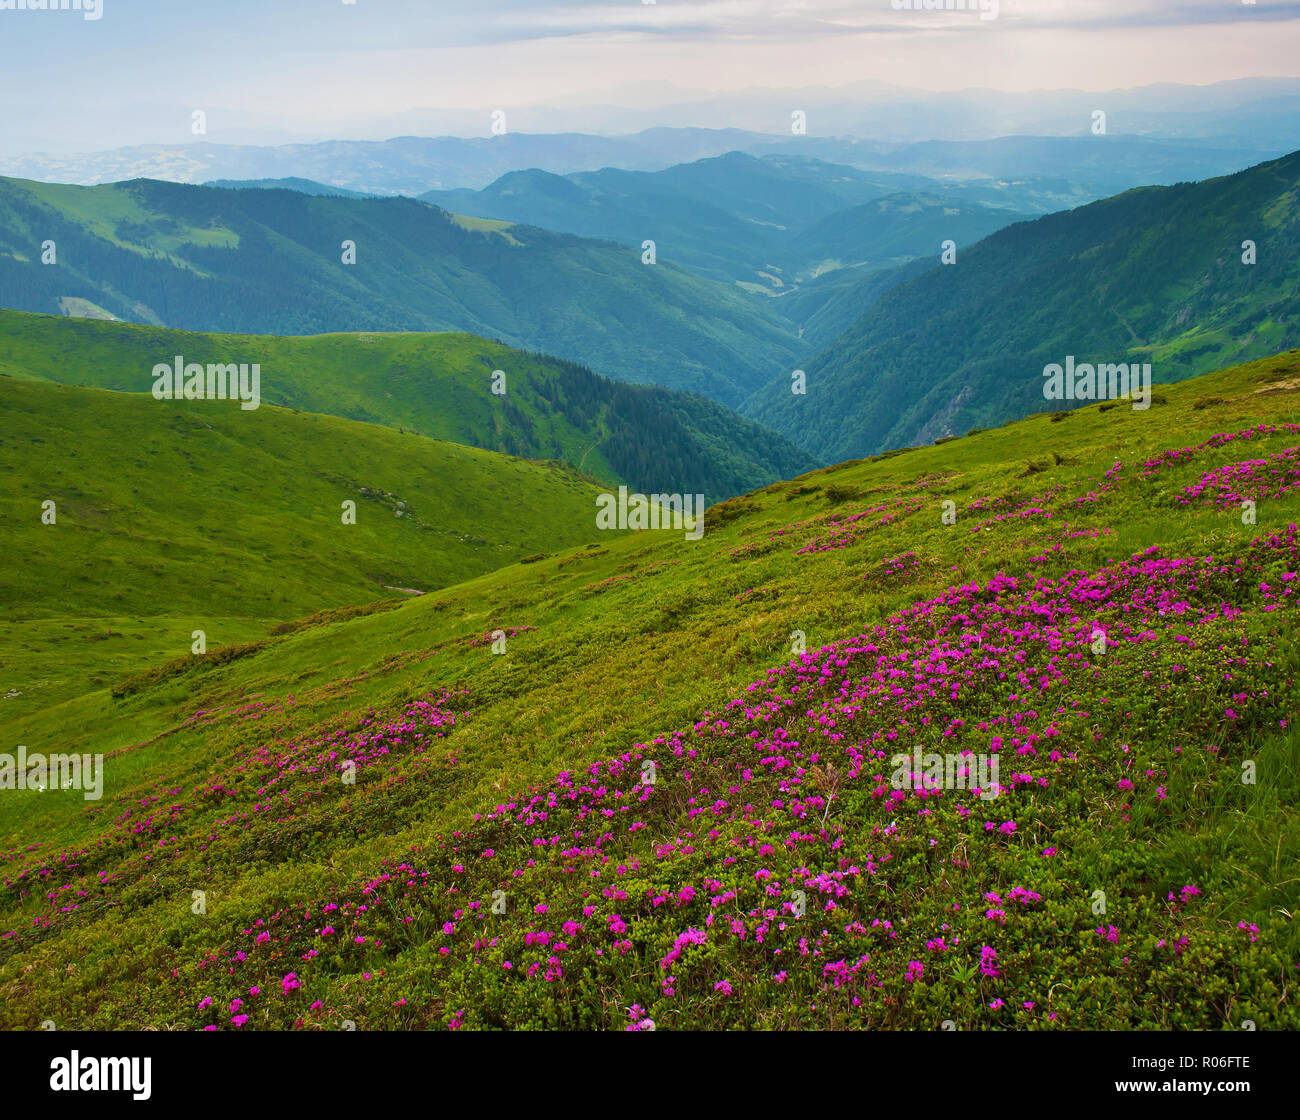 Valley among majestic green rugged mountain hills covered in green lush grass. Closeup of many pink blossoming rhododendron flowers. Summer day in Jun Stock Photo